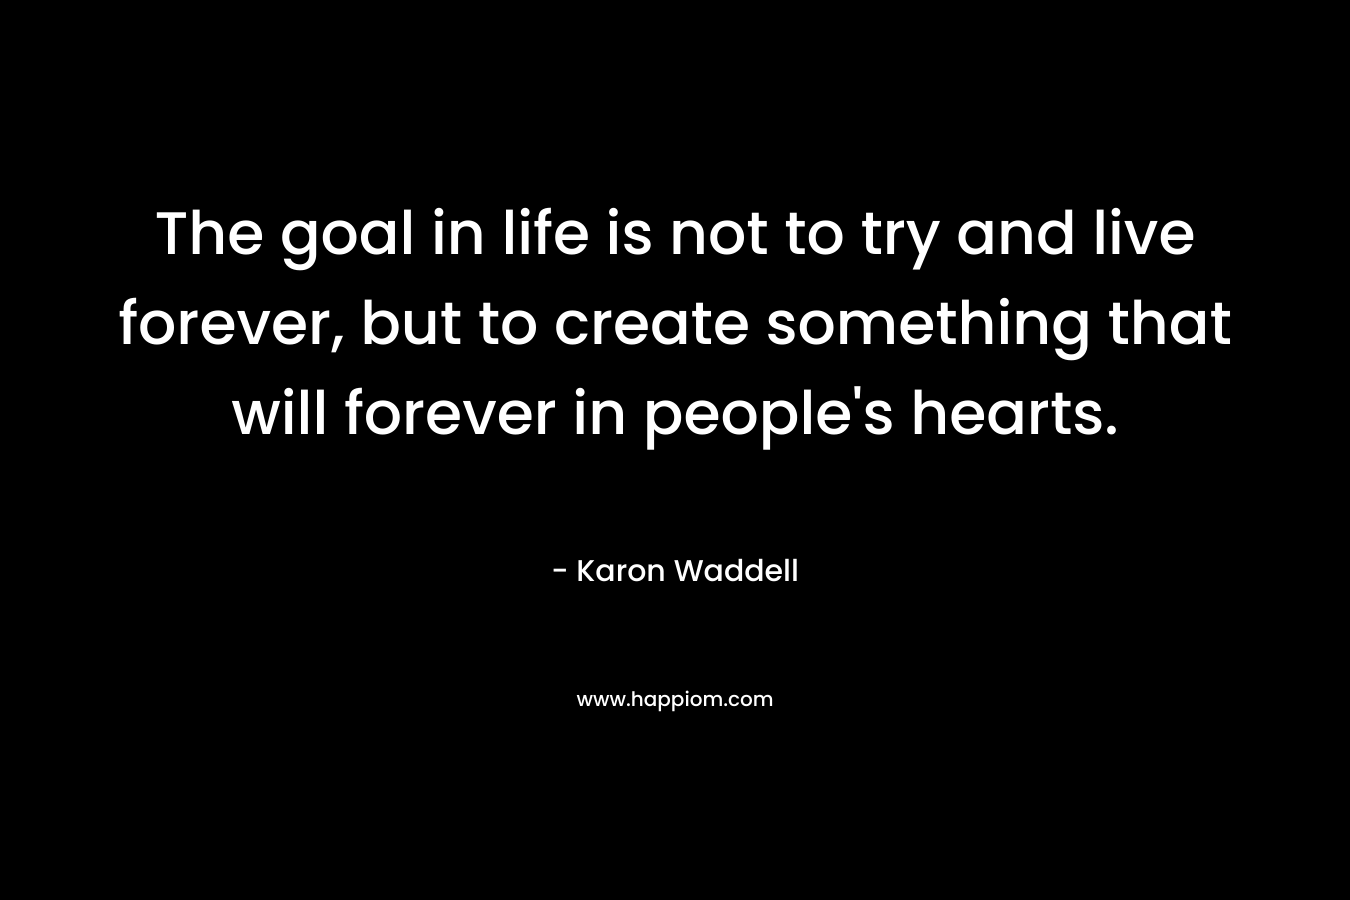 The goal in life is not to try and live forever, but to create something that will forever in people’s hearts. – Karon Waddell